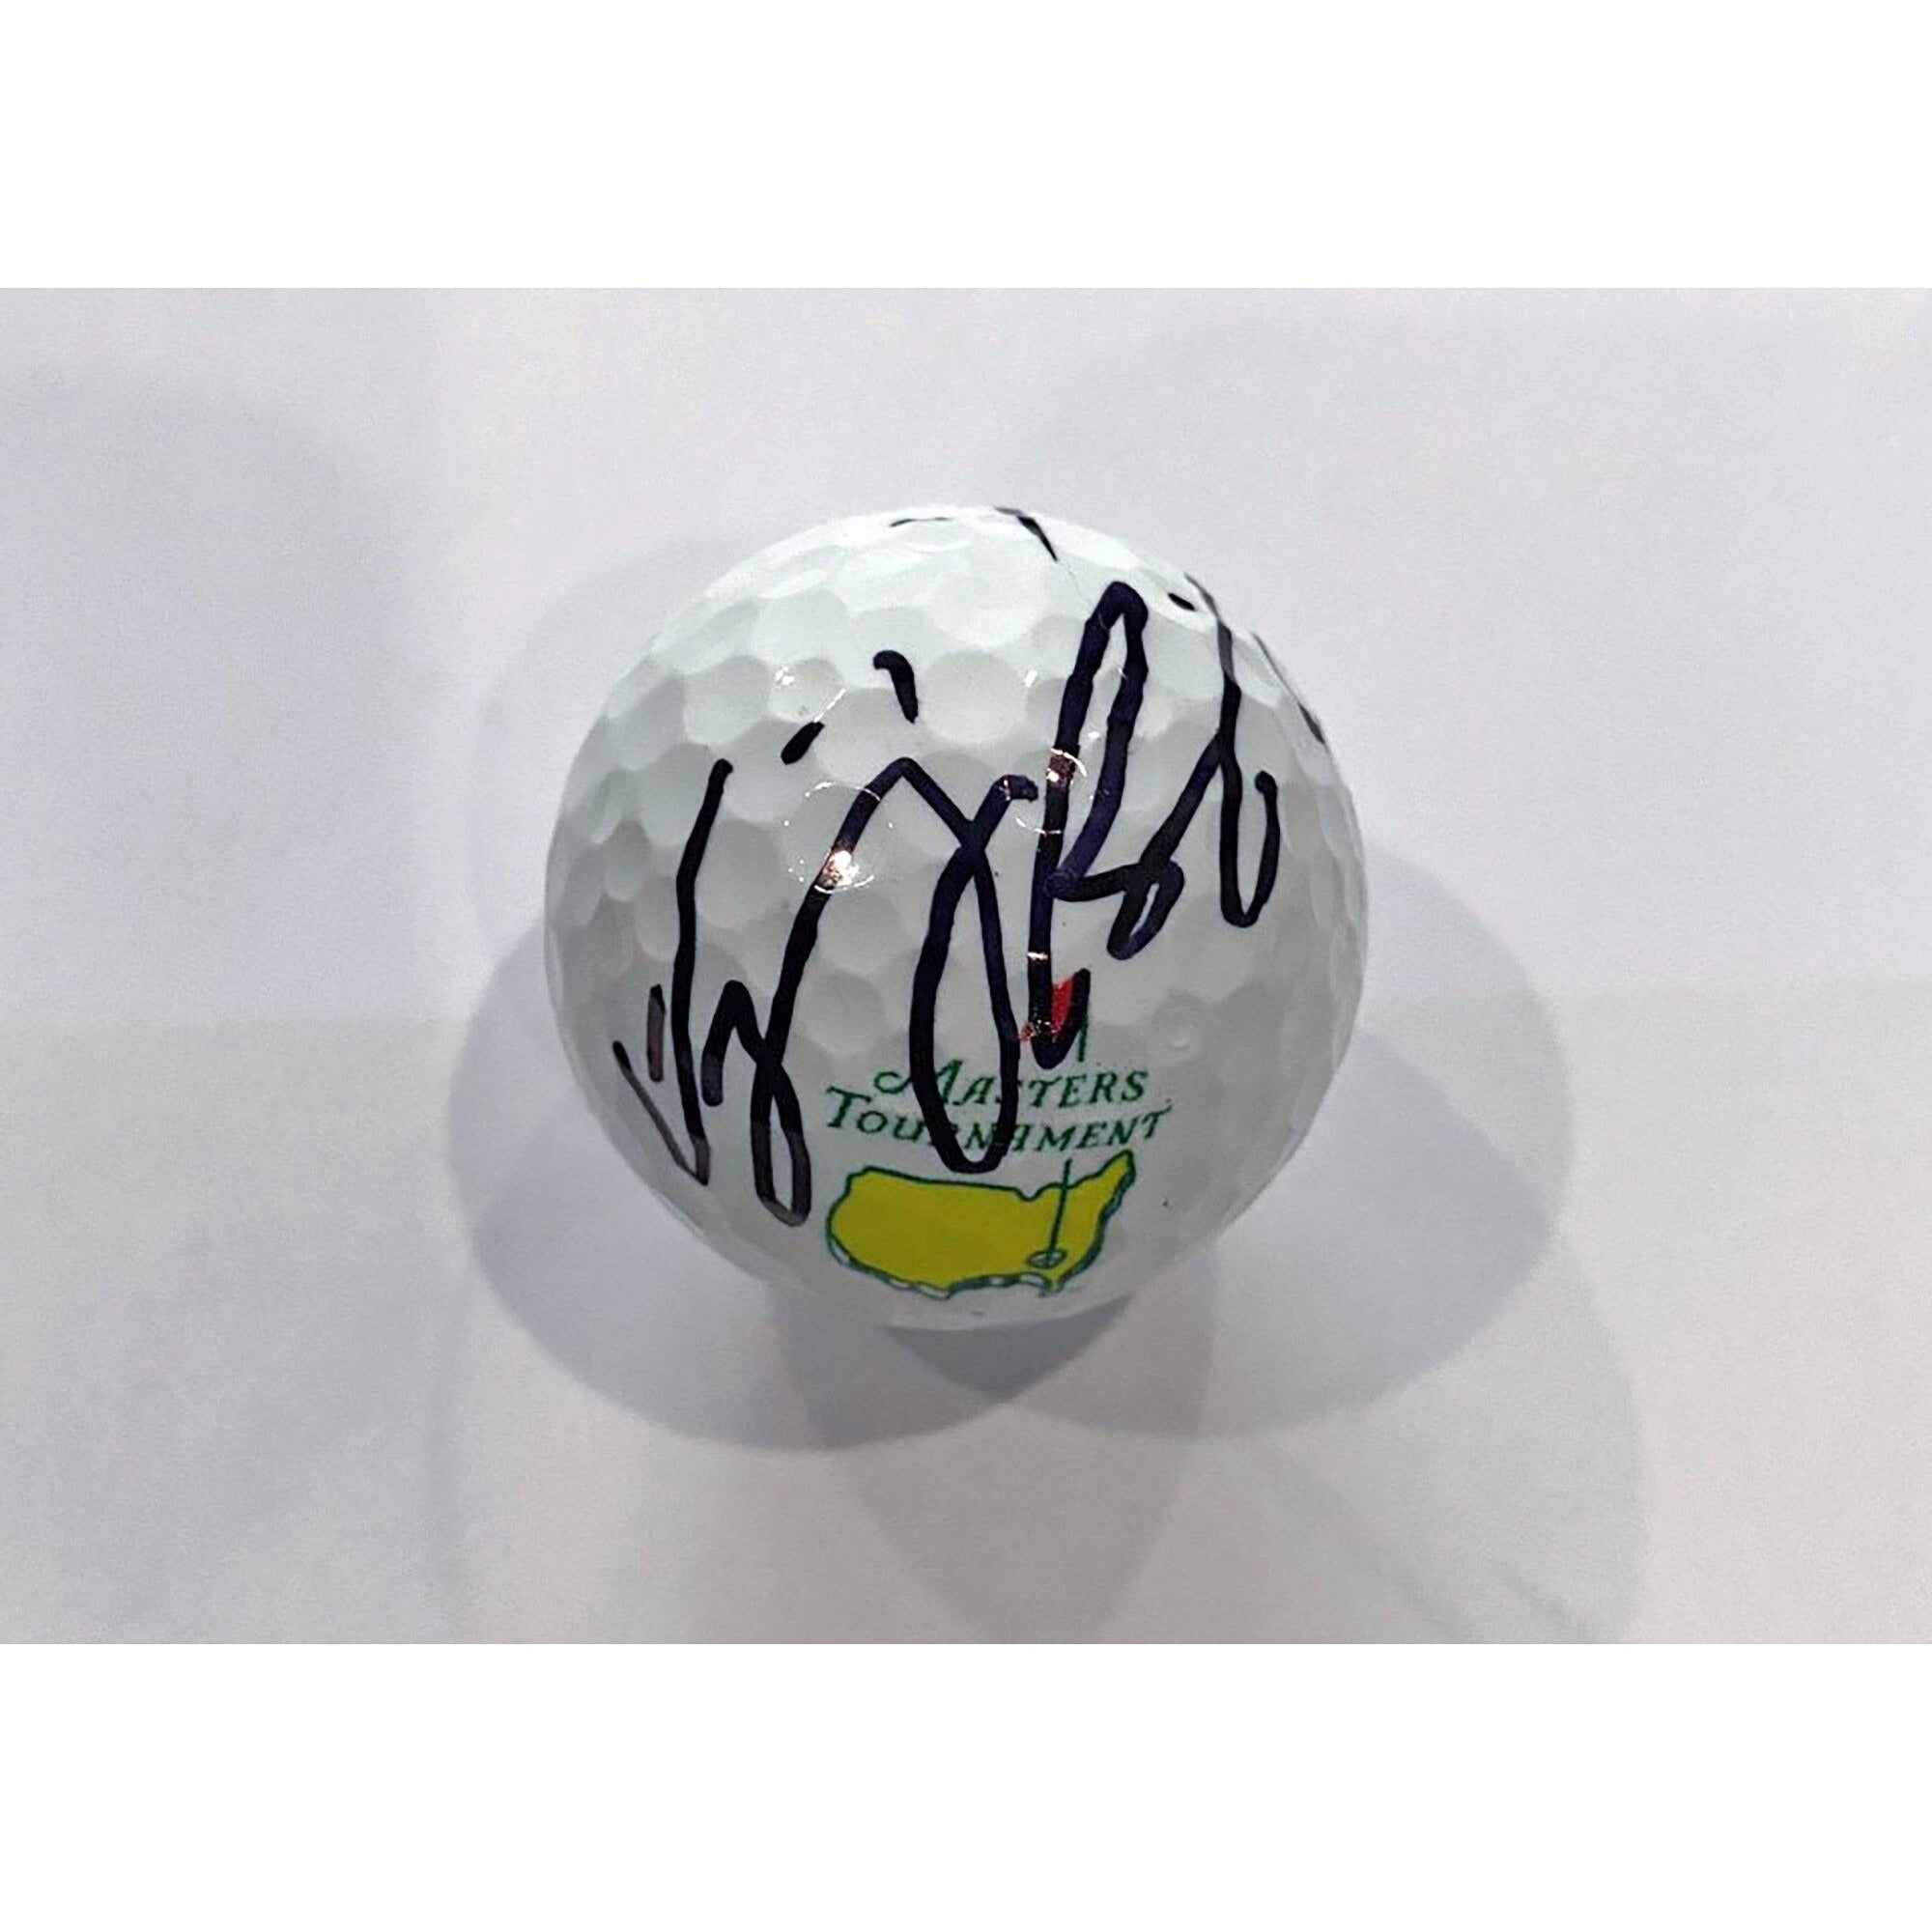 Vijay Singh Masters champion signed golf ball with proof